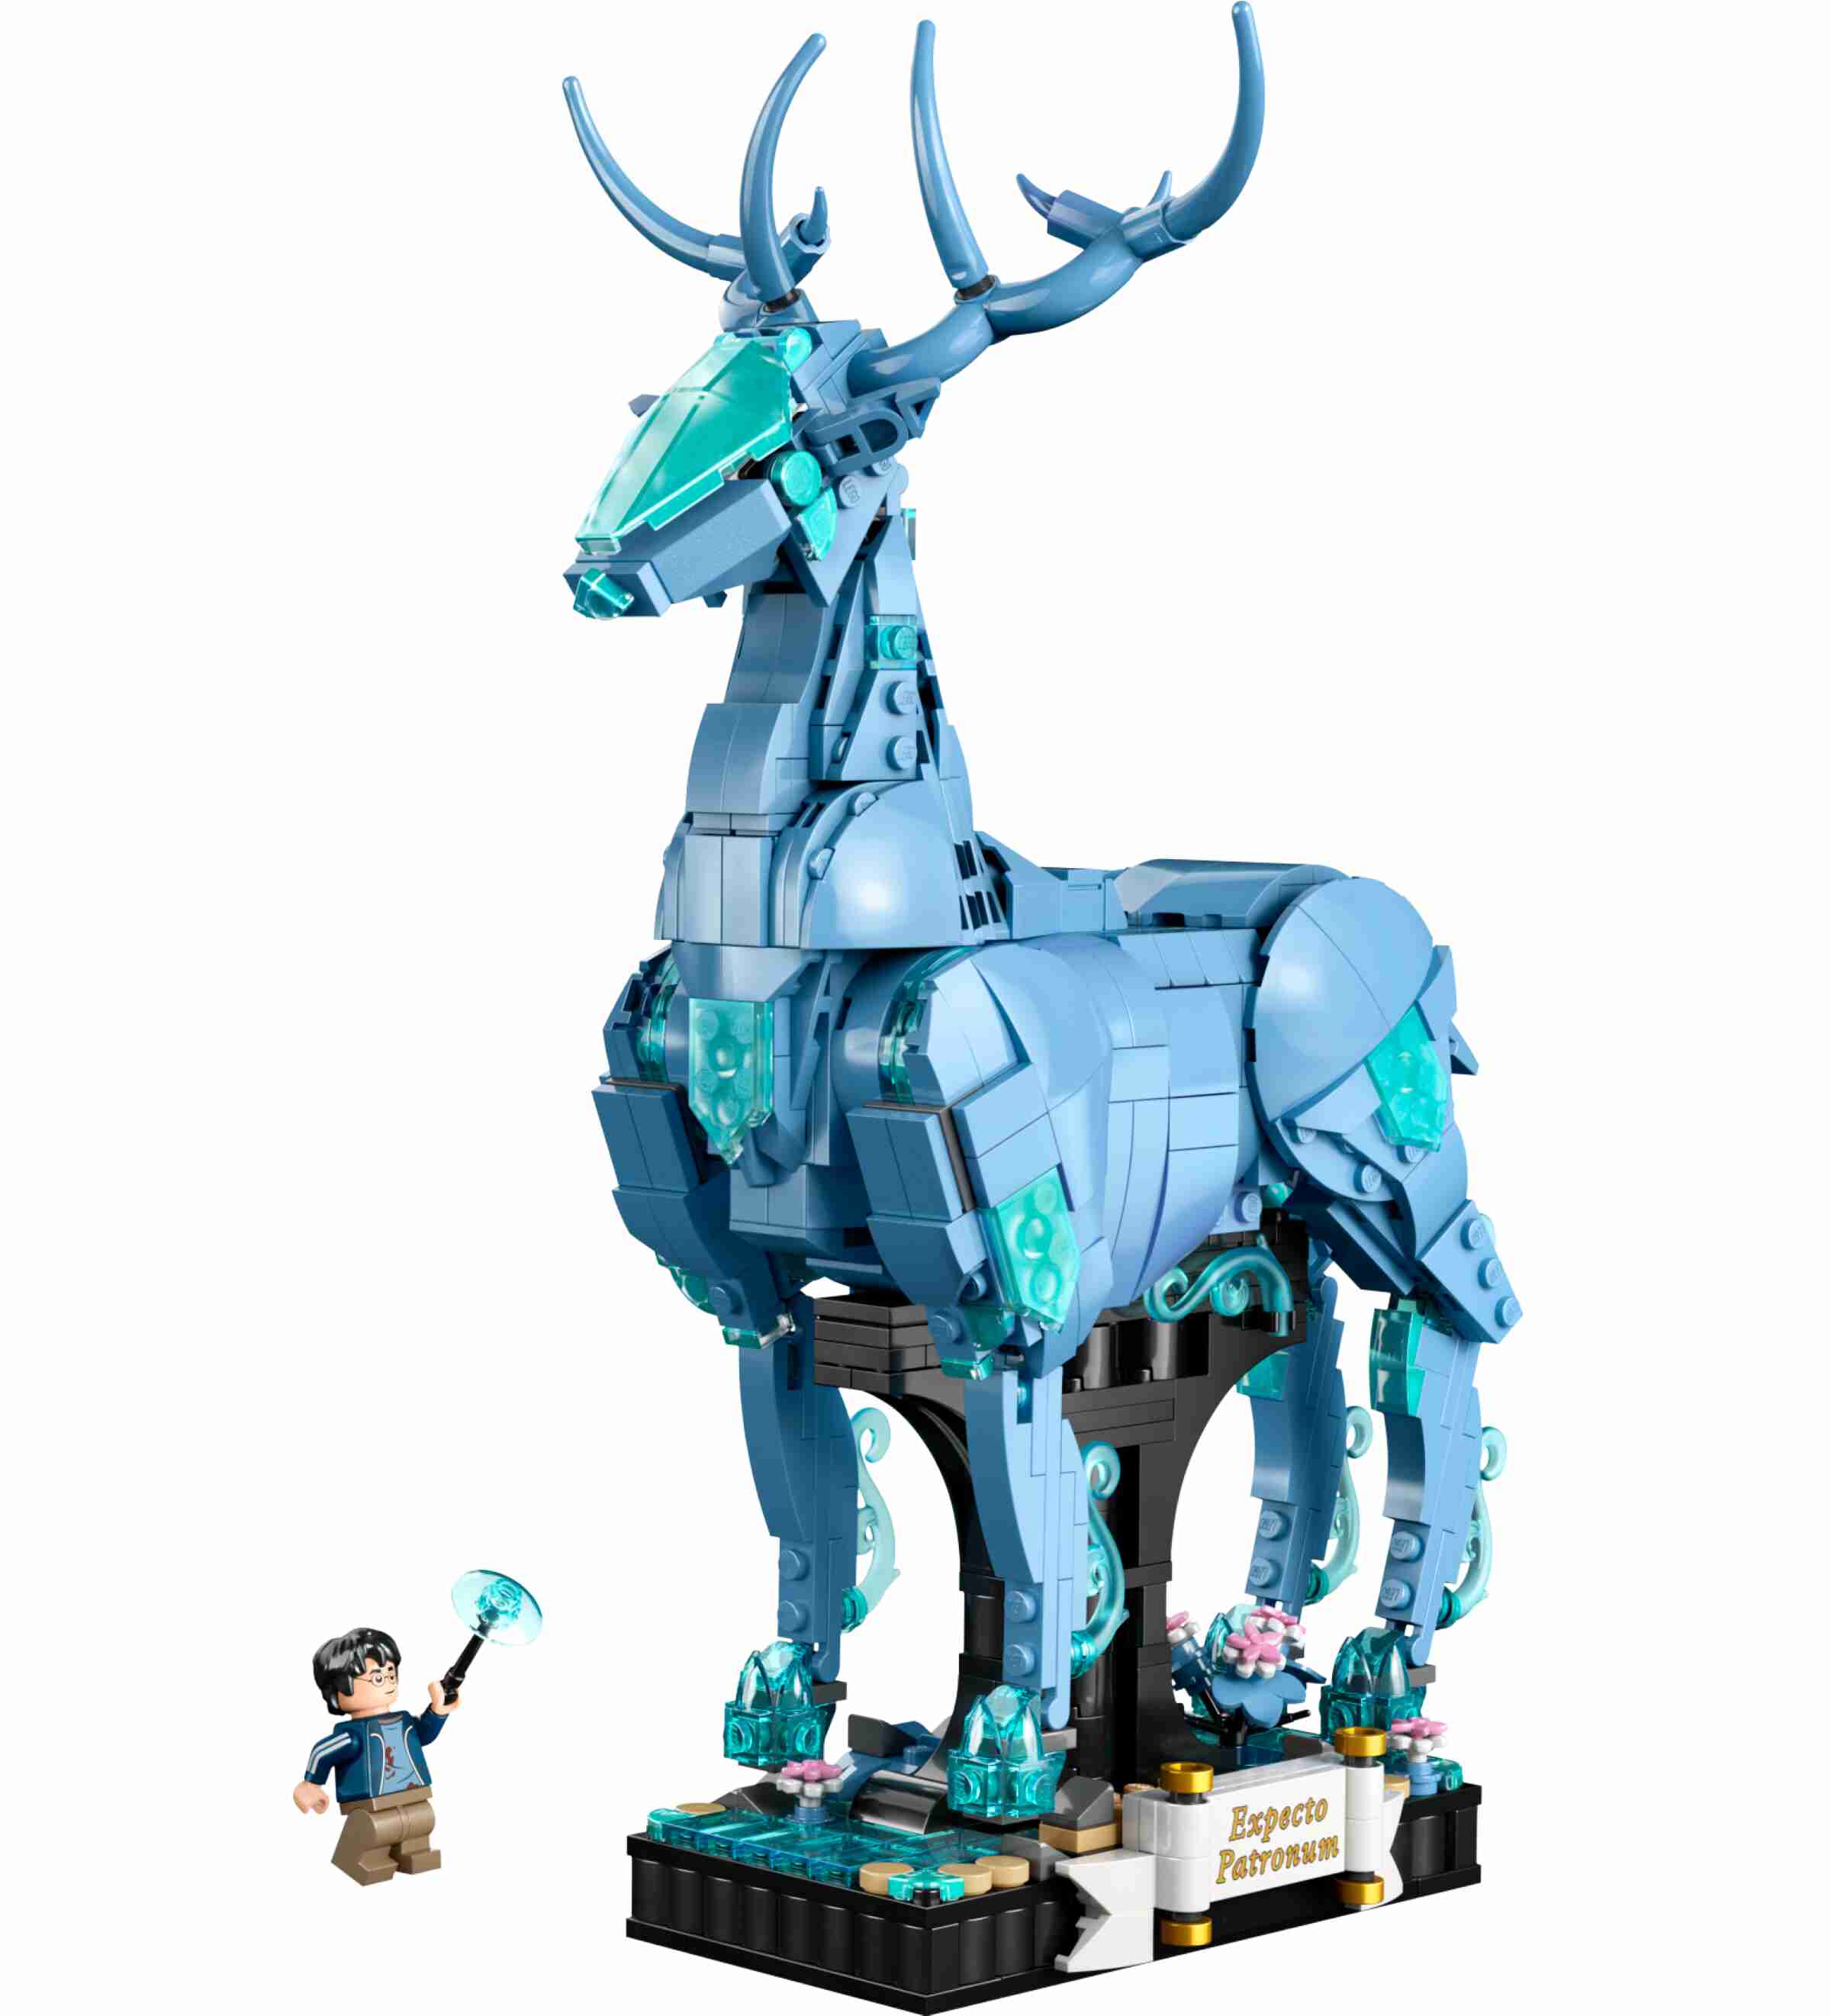 LEGO 76414 Harry Potter Expecto Patronum, 2-in-1 Set, Hirsch oder Wolf